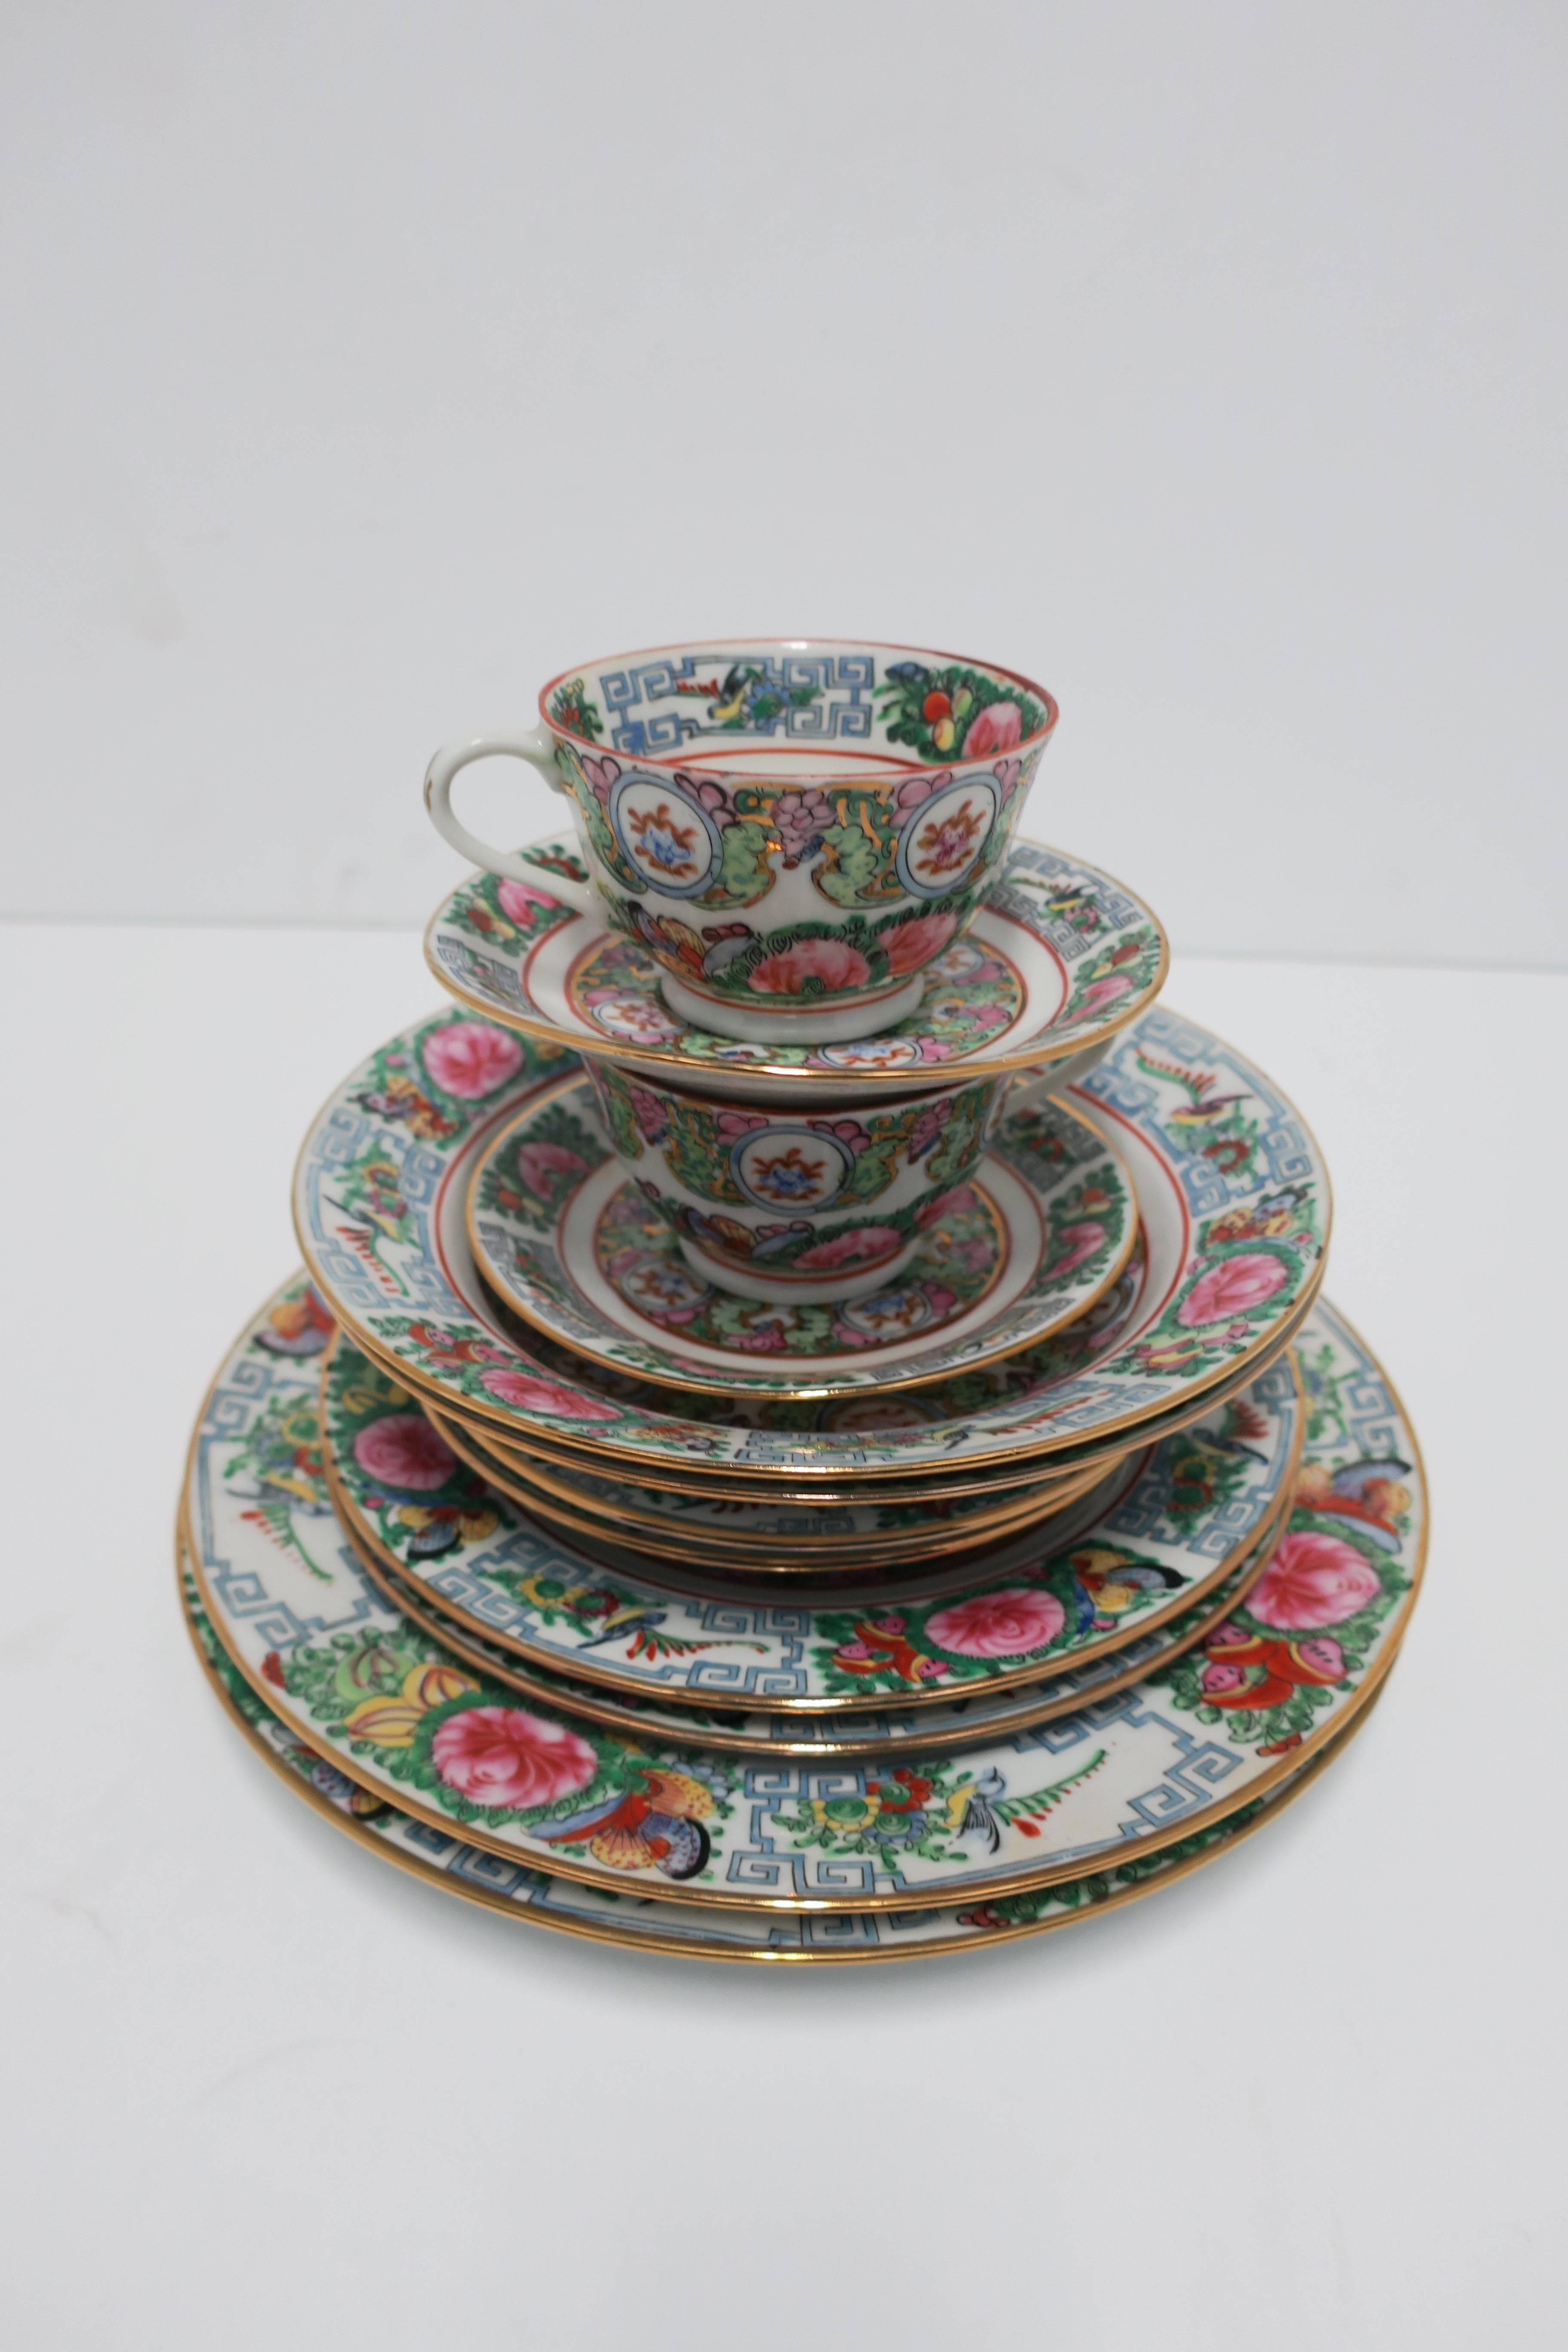 Gorgeous vintage Famille Rose hand-decorated porcelain dinnerware sets, circa mid-20th century. This set of 12 pieces make up two (2) sets, which include tea/coffee cup and saucer. Pieces come with original boxes (3 boxes) marked Villeroy & Boch,